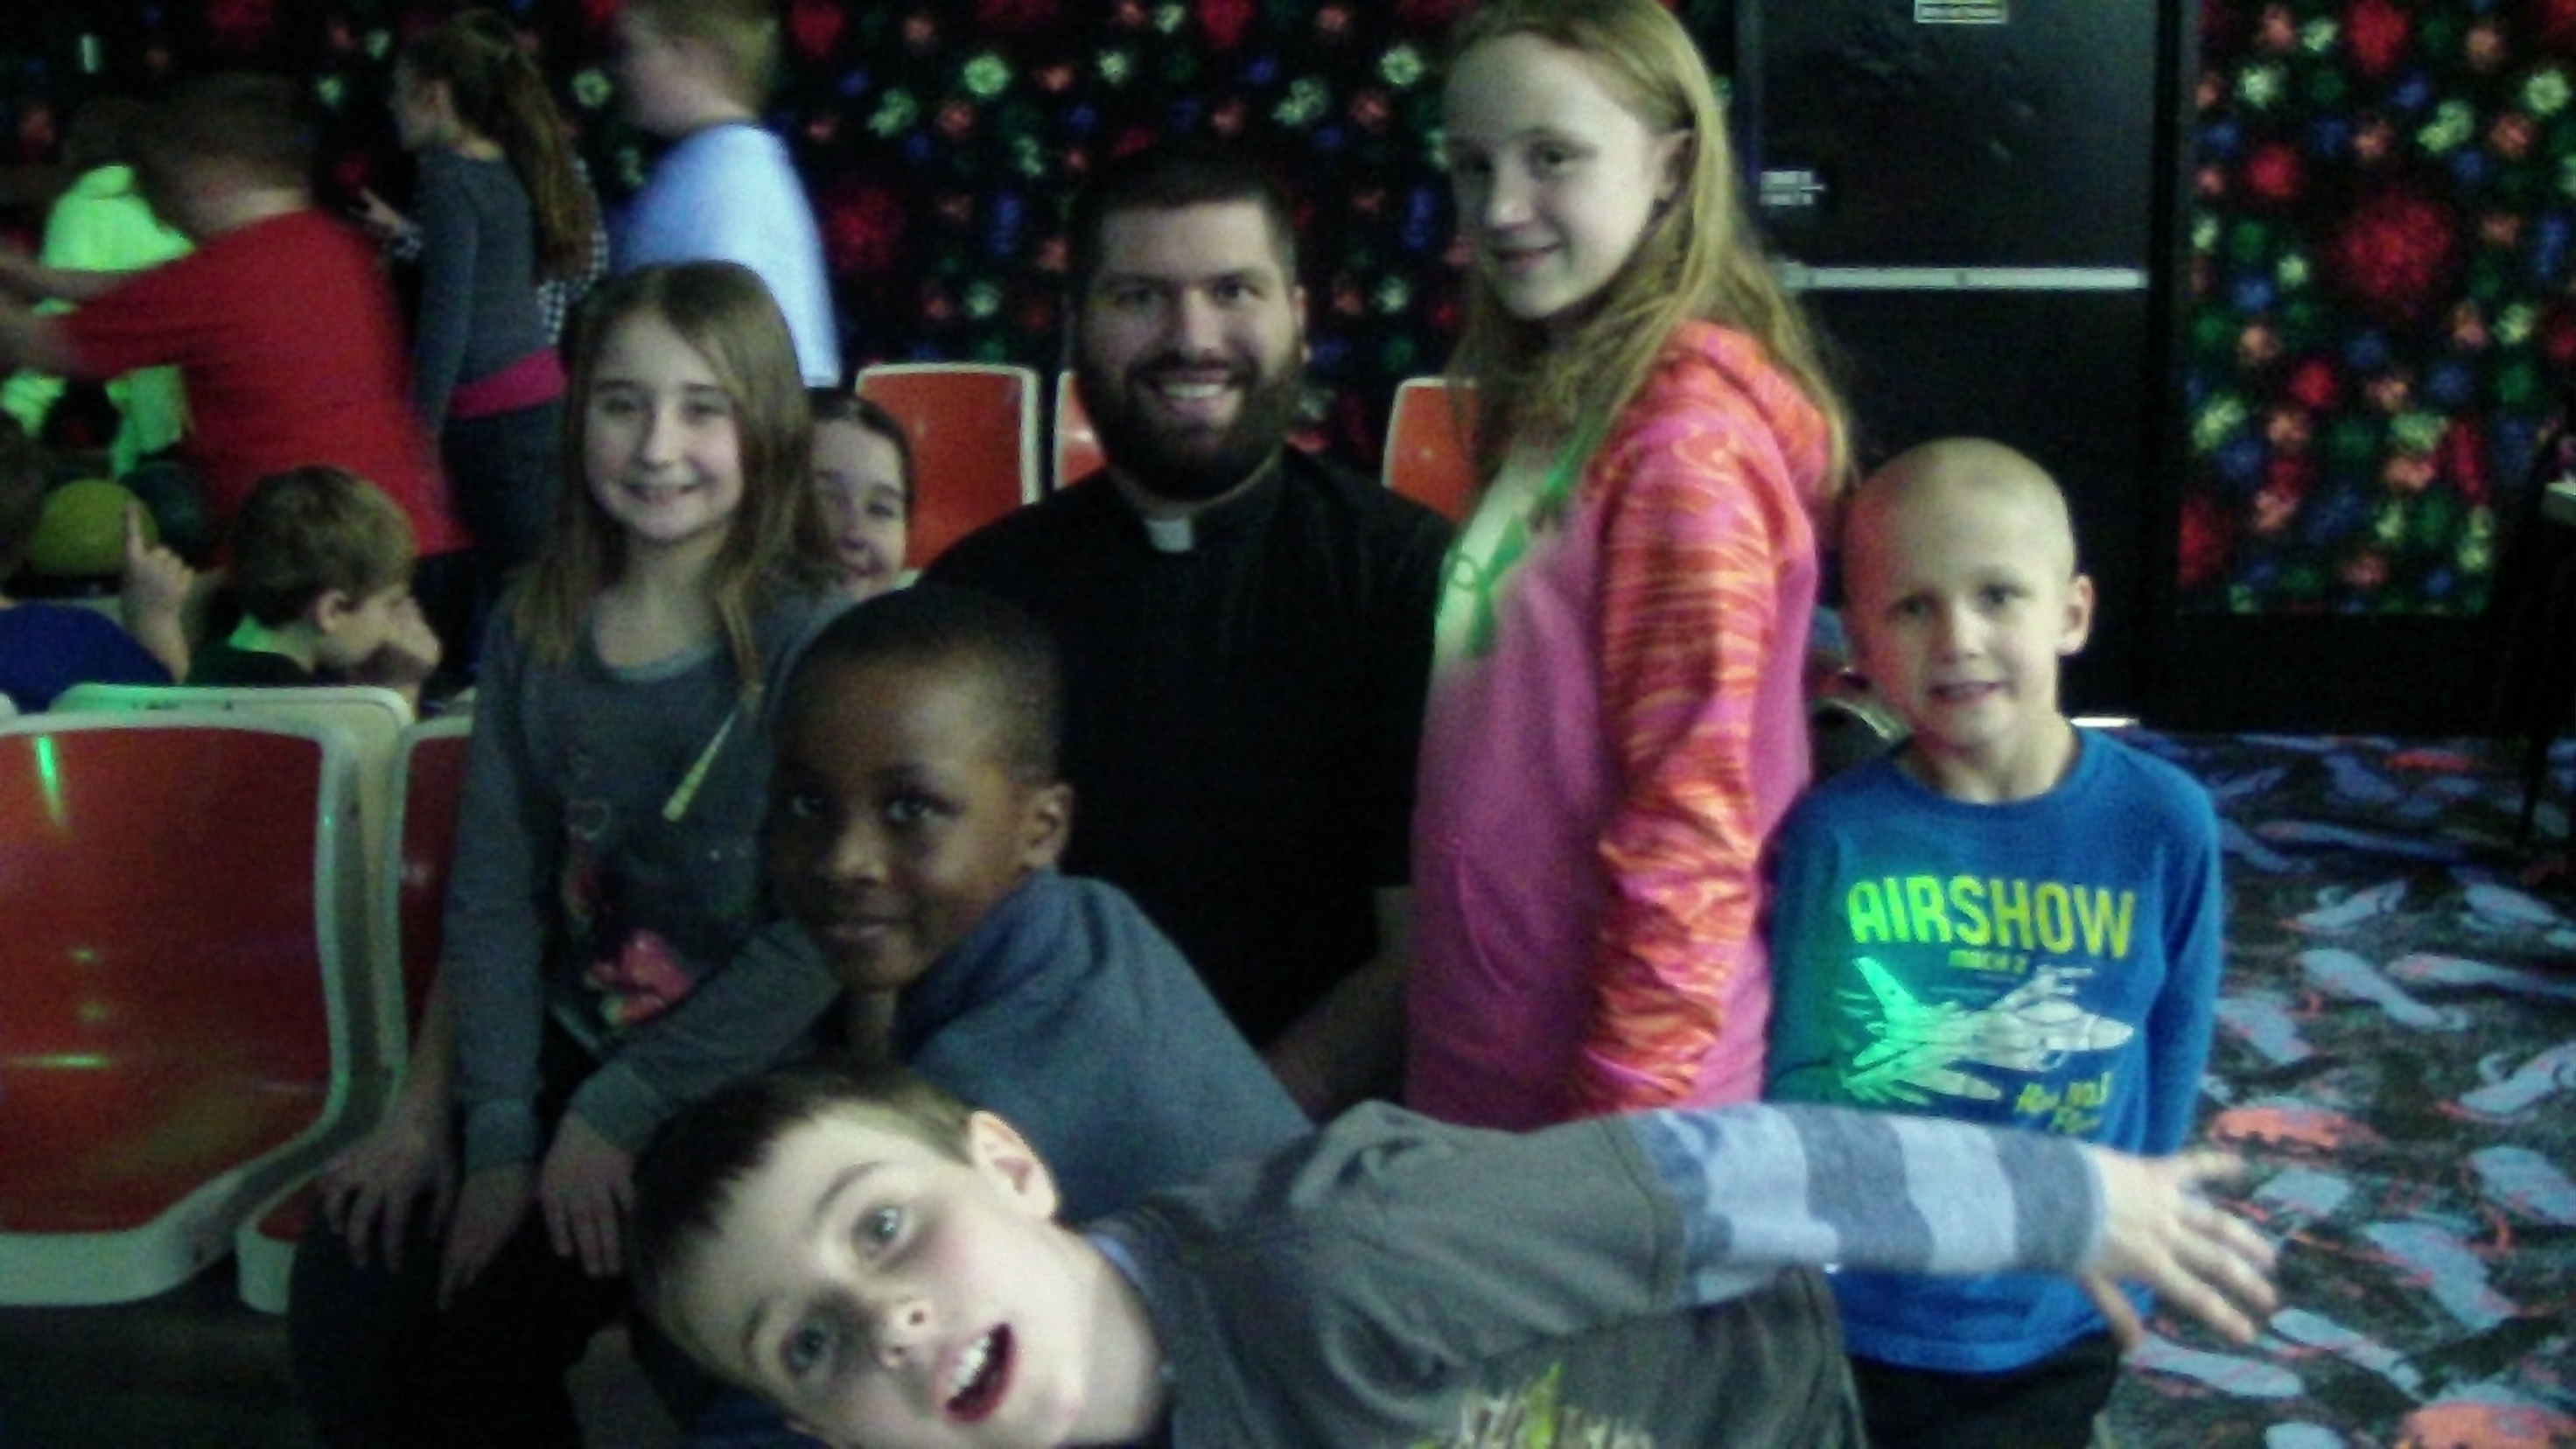 Bowling with Fr. Naples during winter activities Friday.